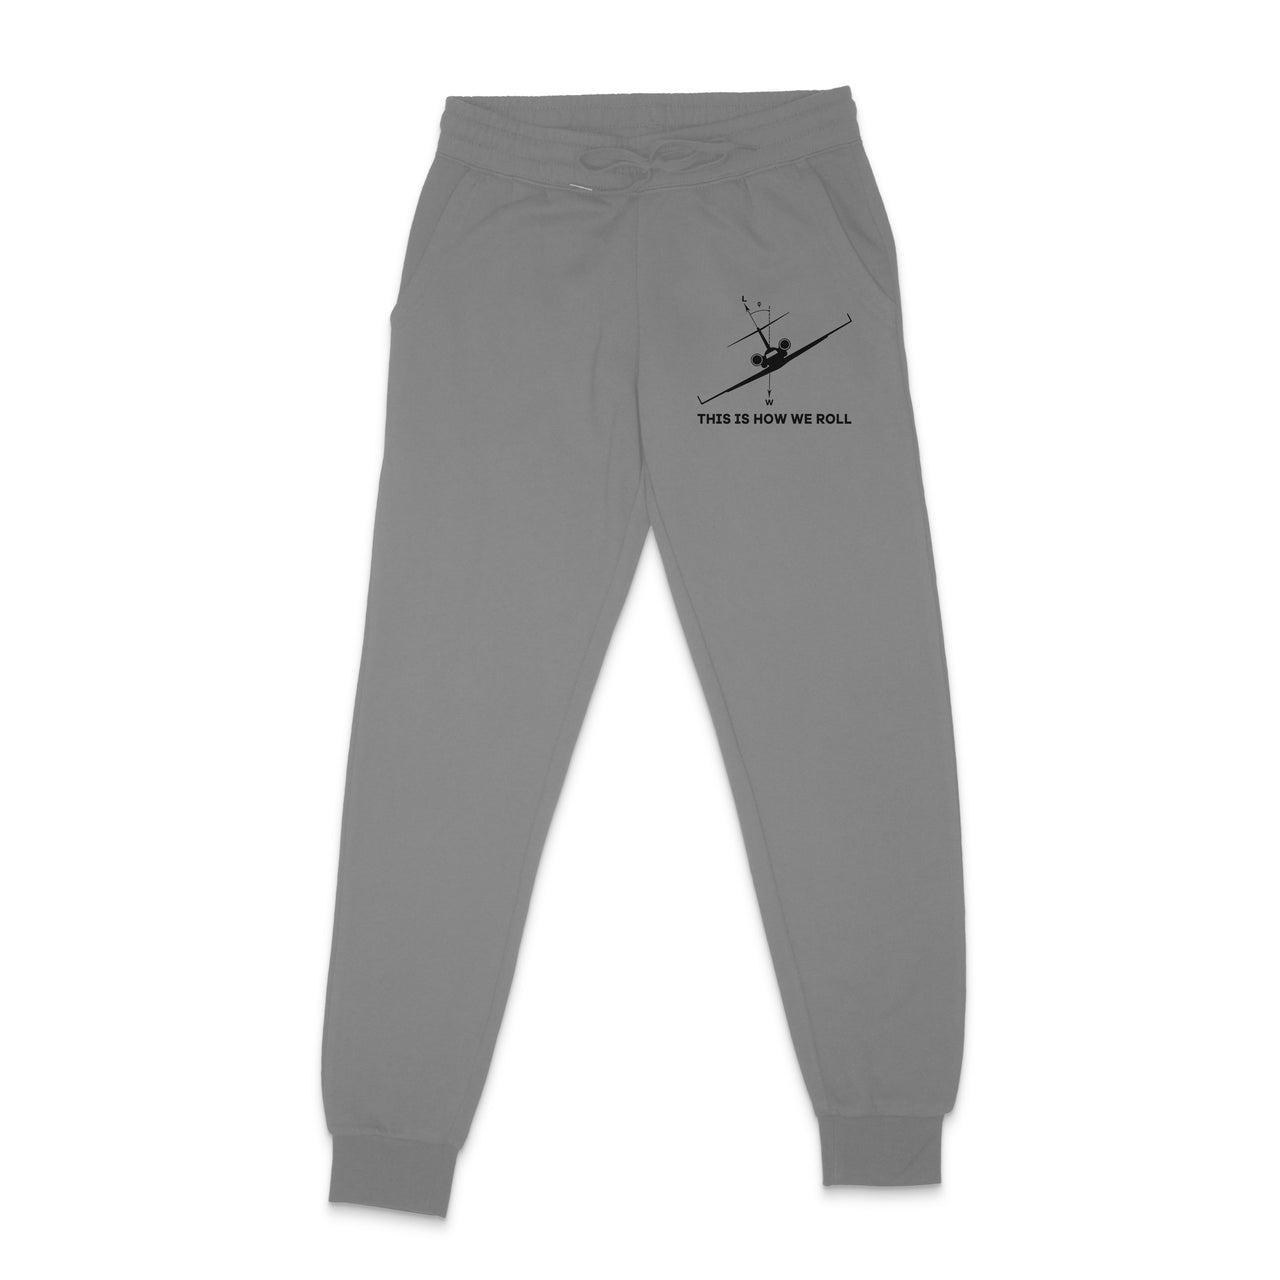 This is How We Roll Designed Sweatpants